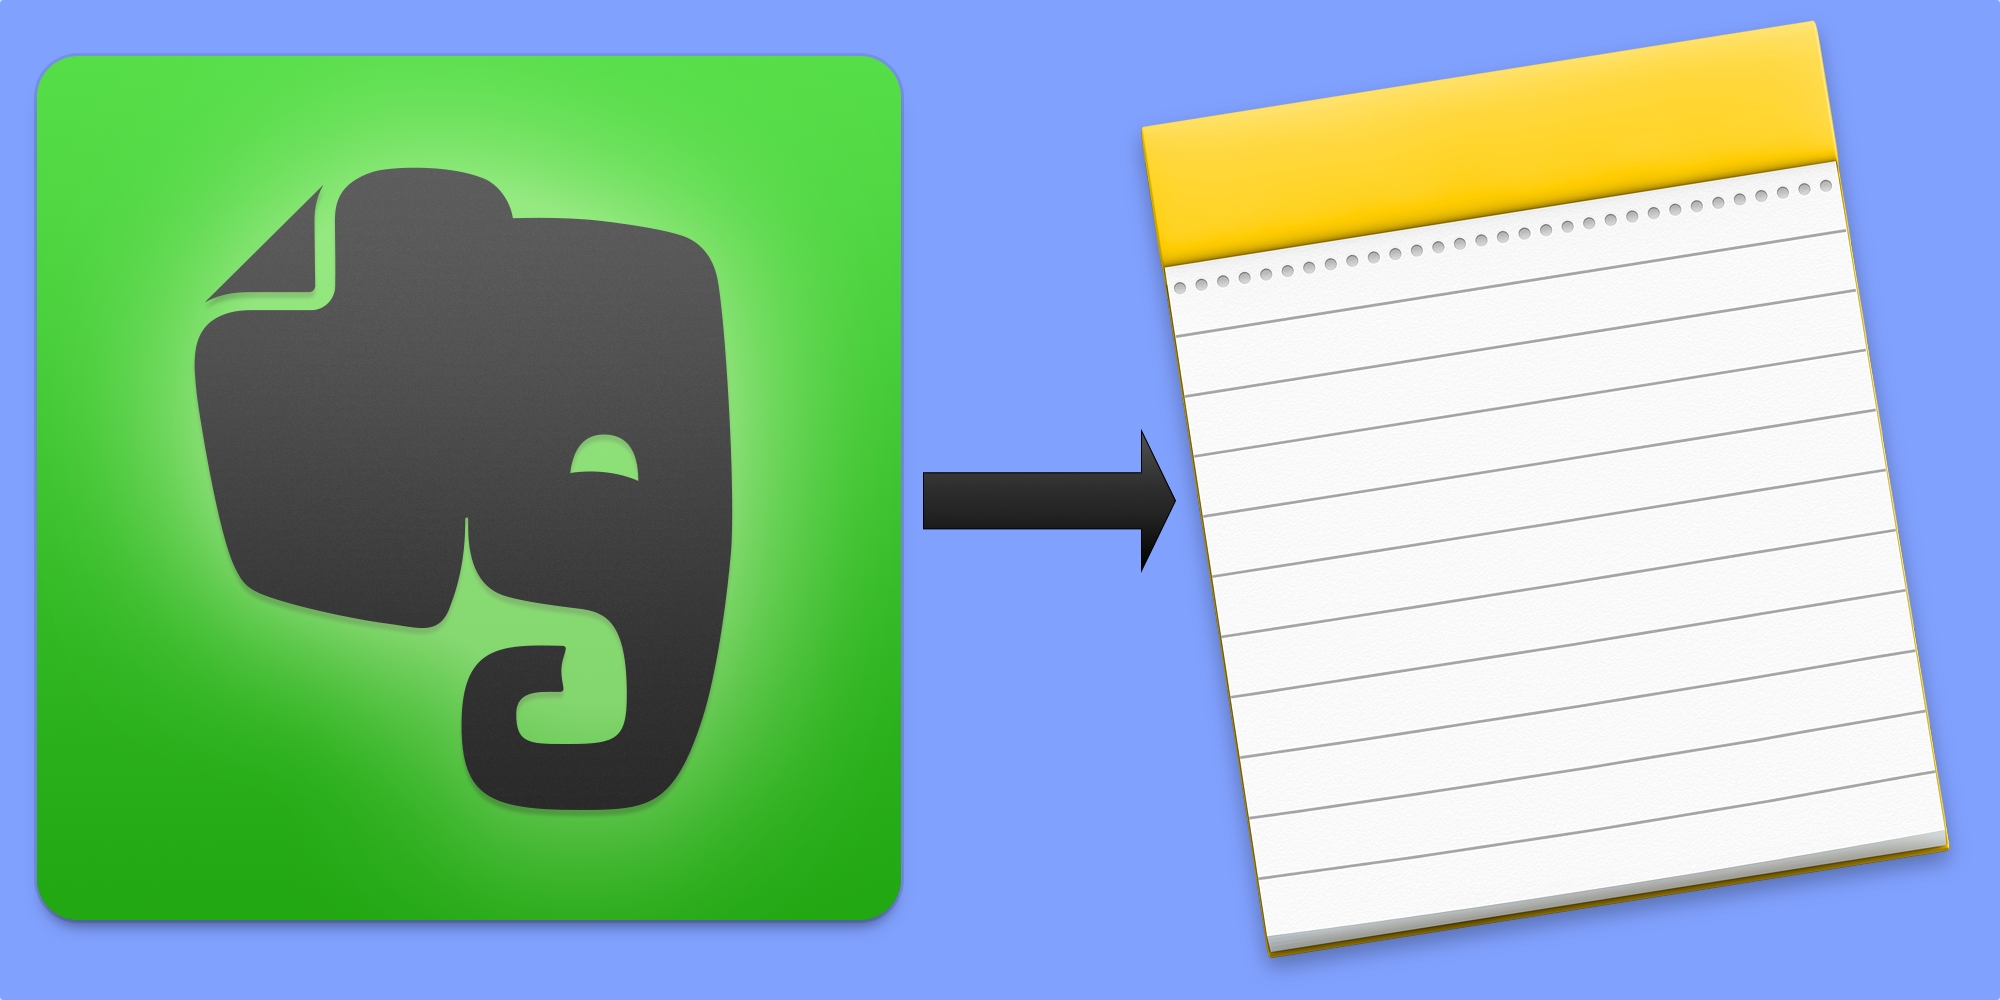 migrate evernote for mac to onenote for mac